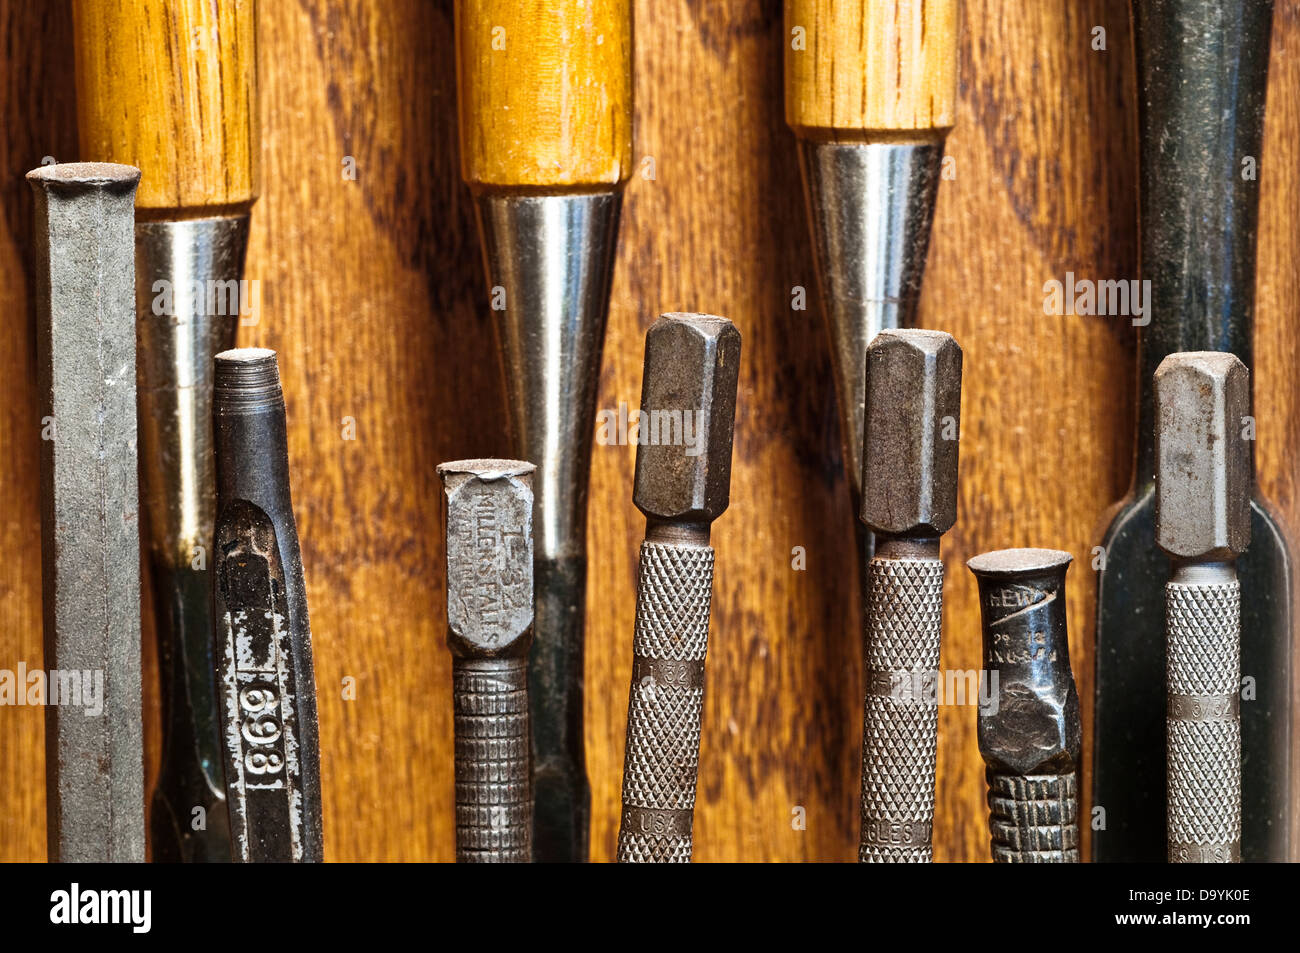 Woodworking hand tools including awls, punches, chisels and sets displayed in a wall cabinet. Stock Photo